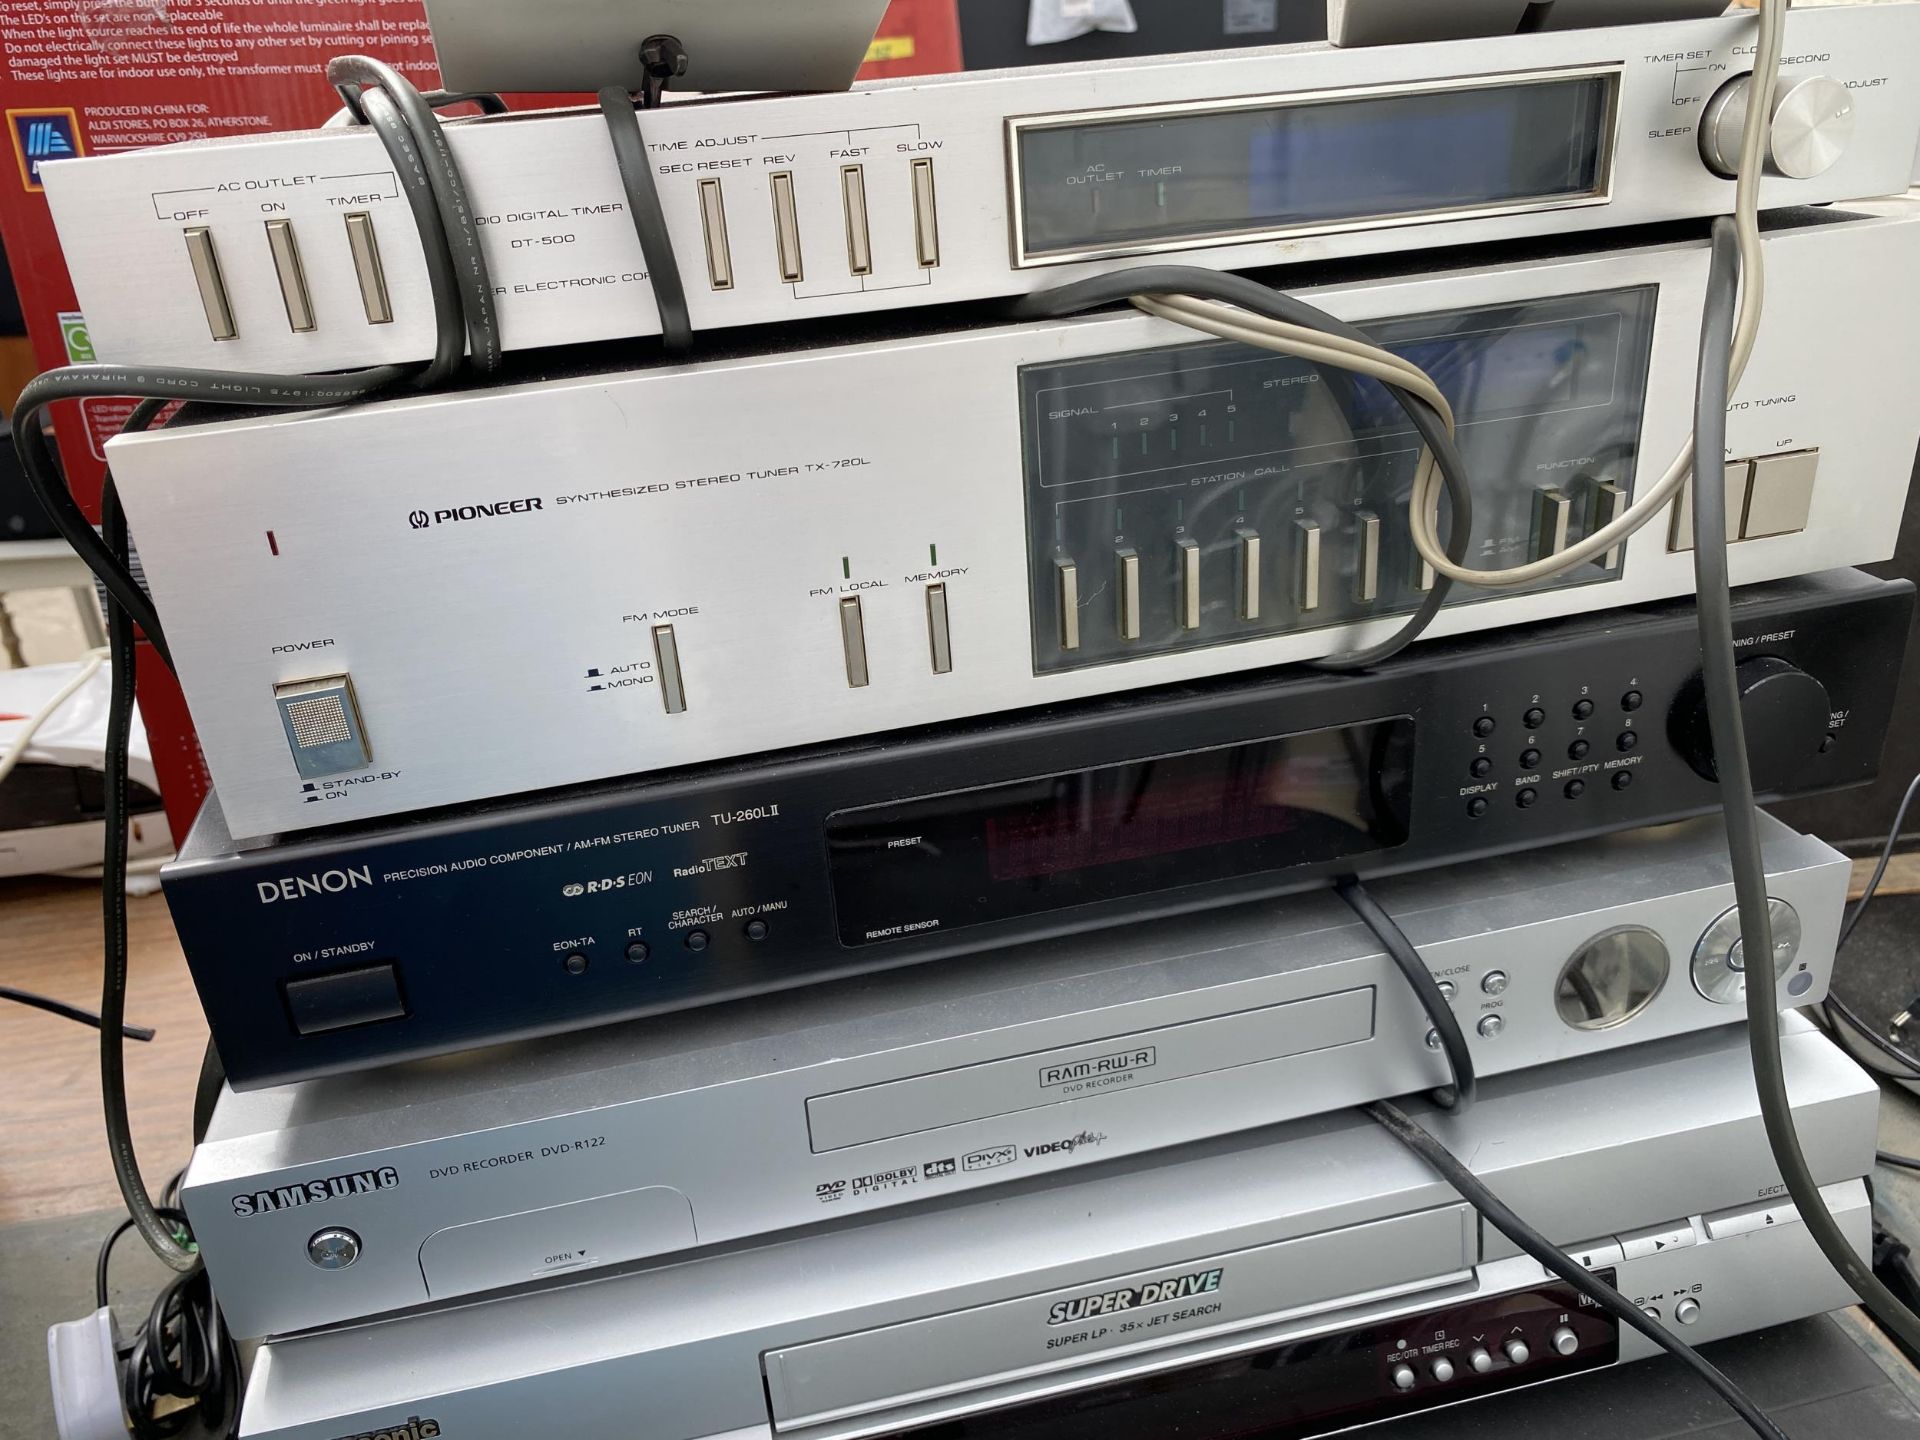 A COLLECTION OF DVD PLAYERS AND SPEAKERS INCLUDING YAMAHA, SAMSUNG, DENON ETC - Image 2 of 2